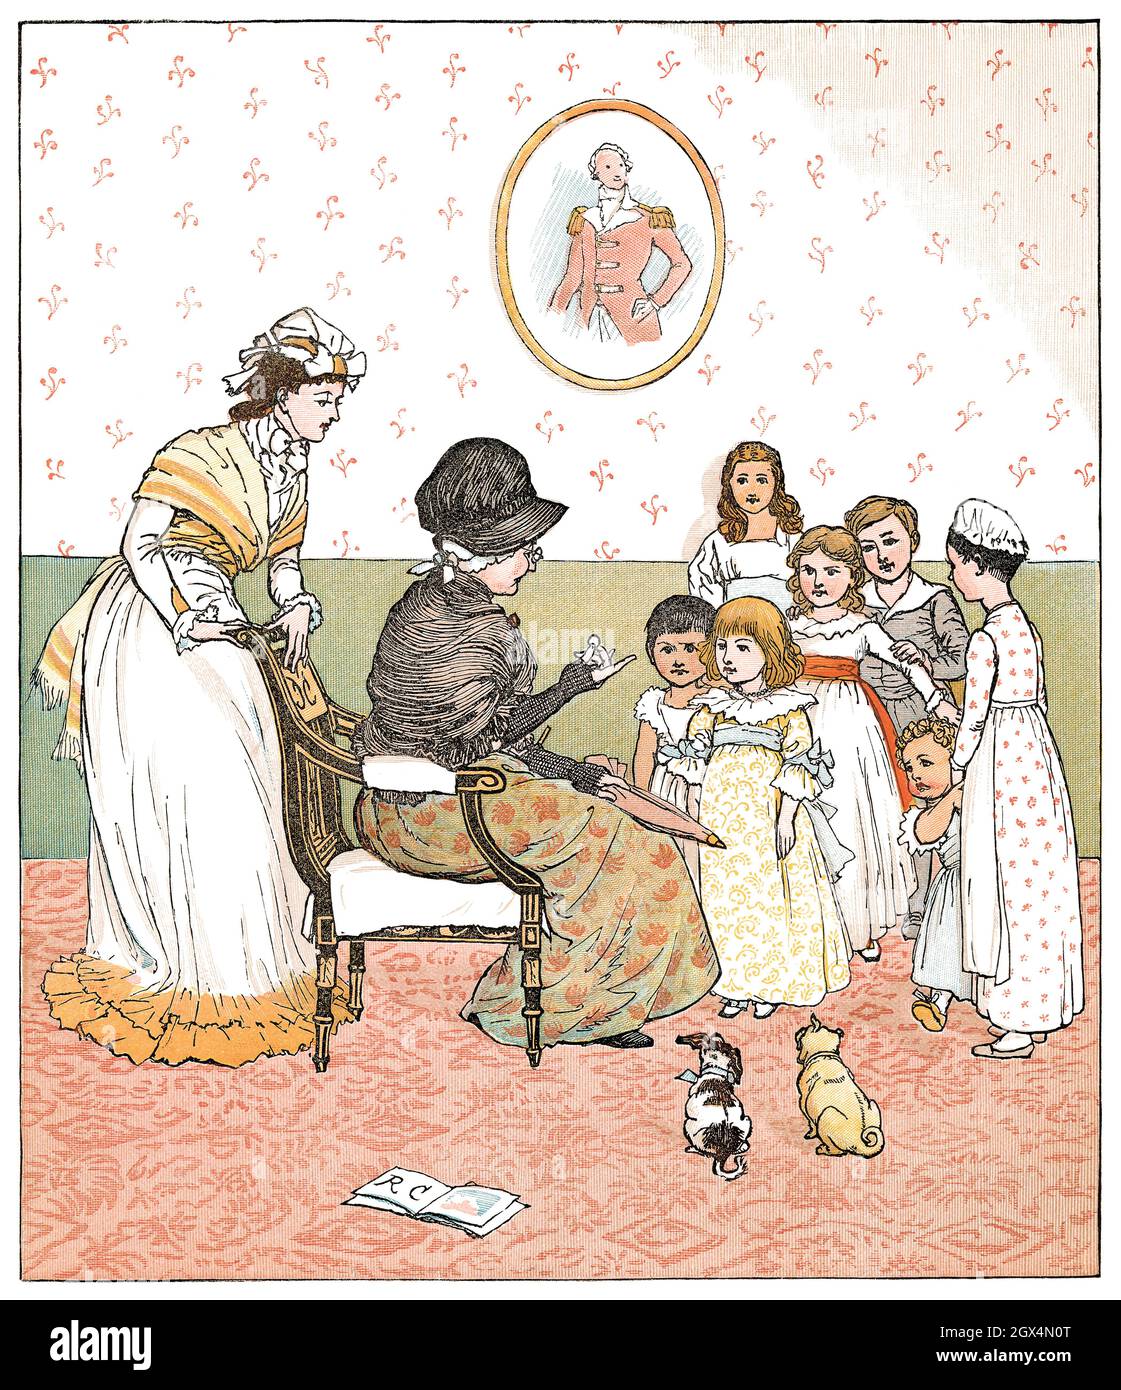 1880 vintage illustration by Randolph Caldecott for the nursery rhyme Sing A Song Of Sixpence. Stock Photo